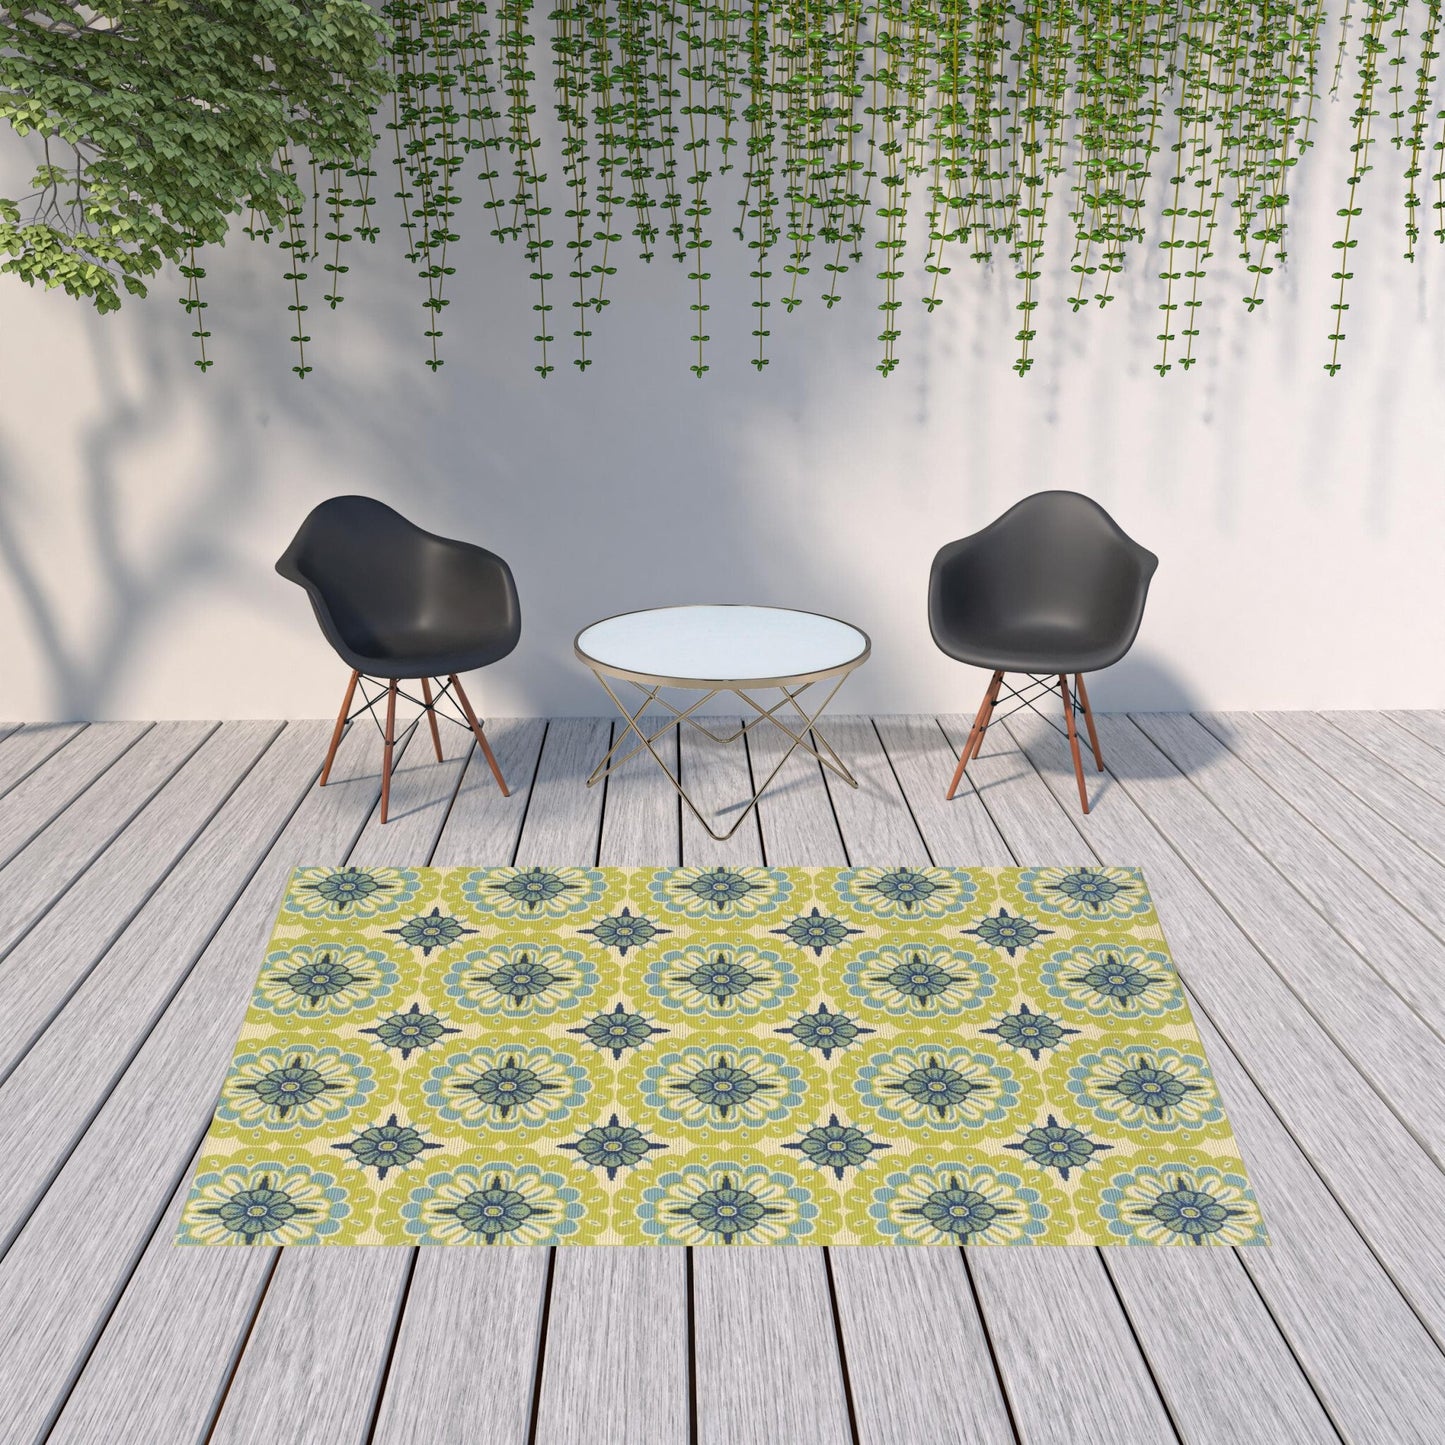 7' x 10' Green and Ivory Floral Stain Resistant Indoor Outdoor Area Rug